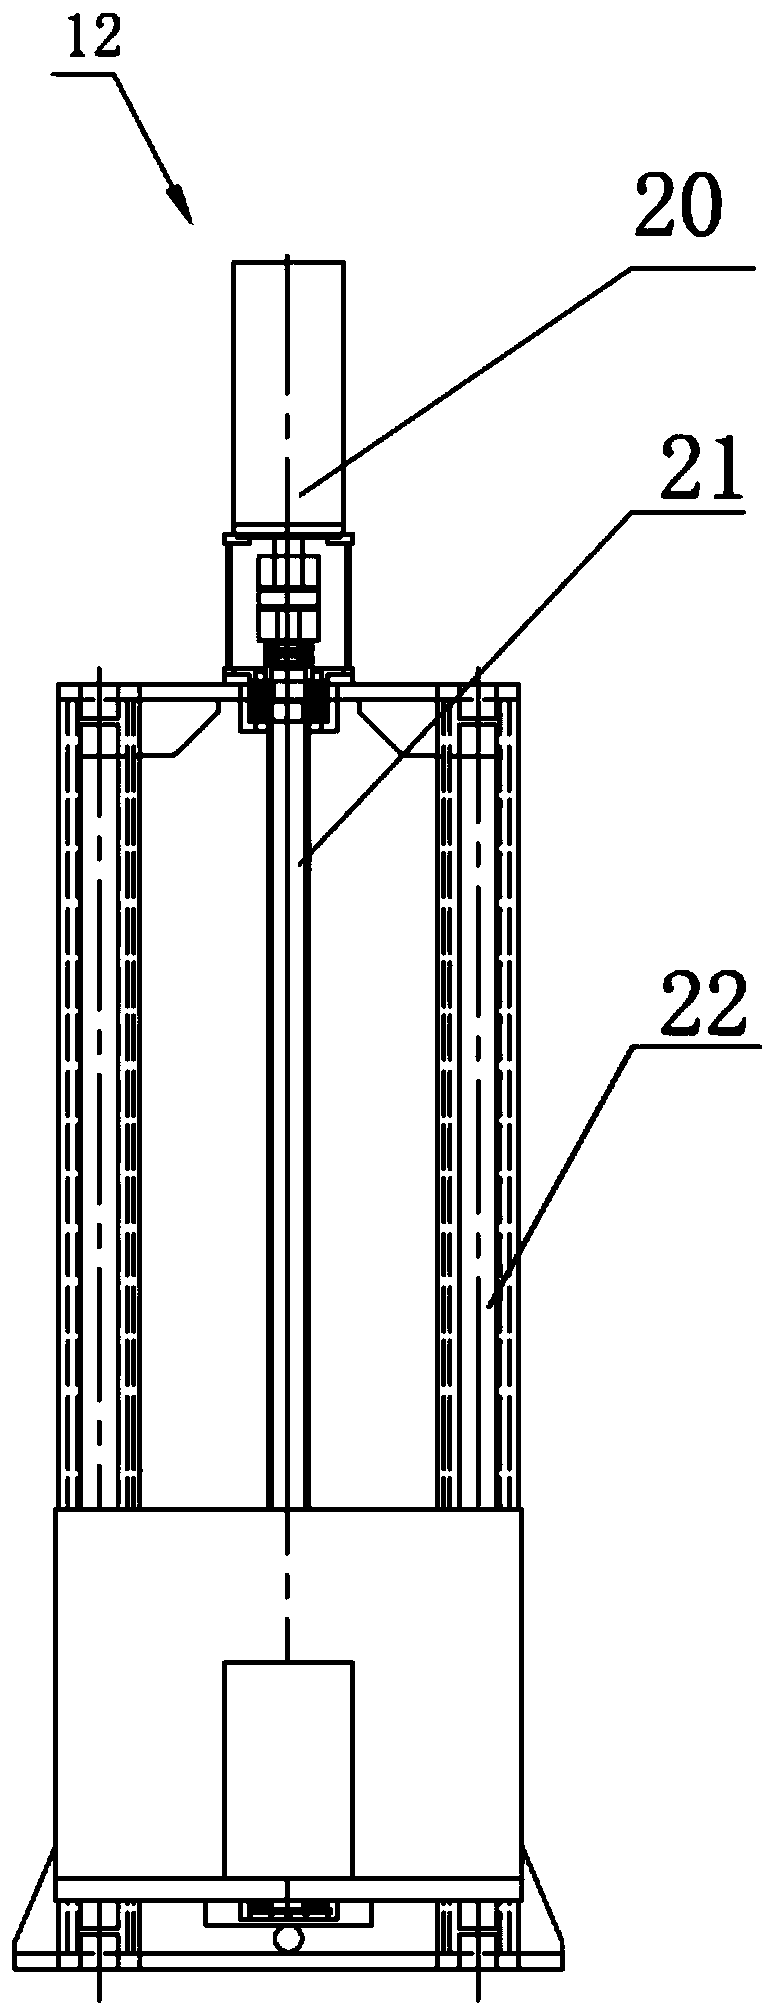 A Vertical Plane Motion Mechanism Used in Hydrodynamic Model Test